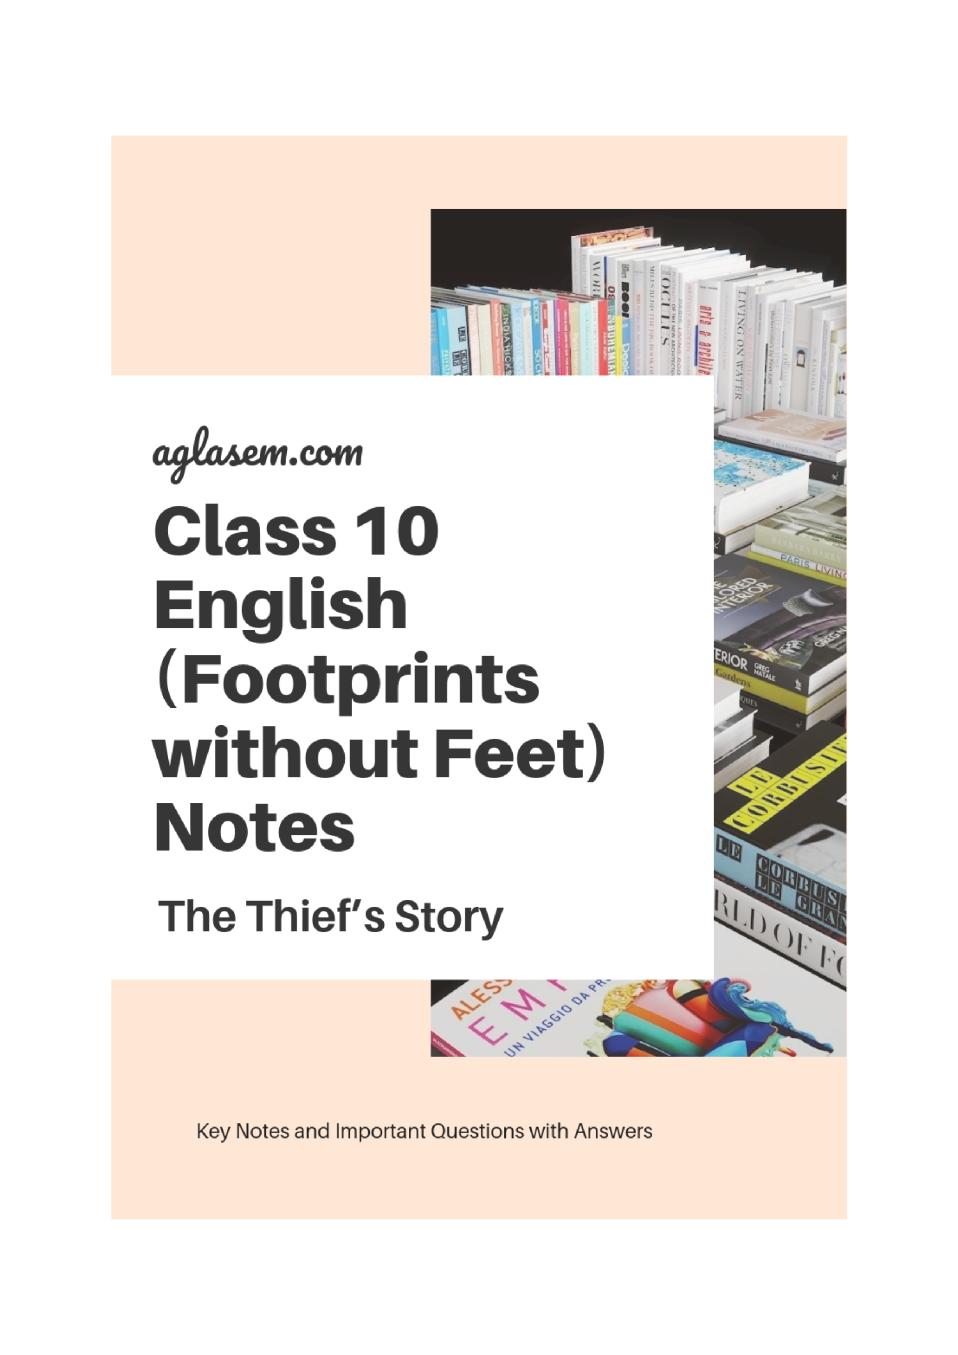 Class 10 English Footprints without Feet Notes For The Thief’s Story - Page 1